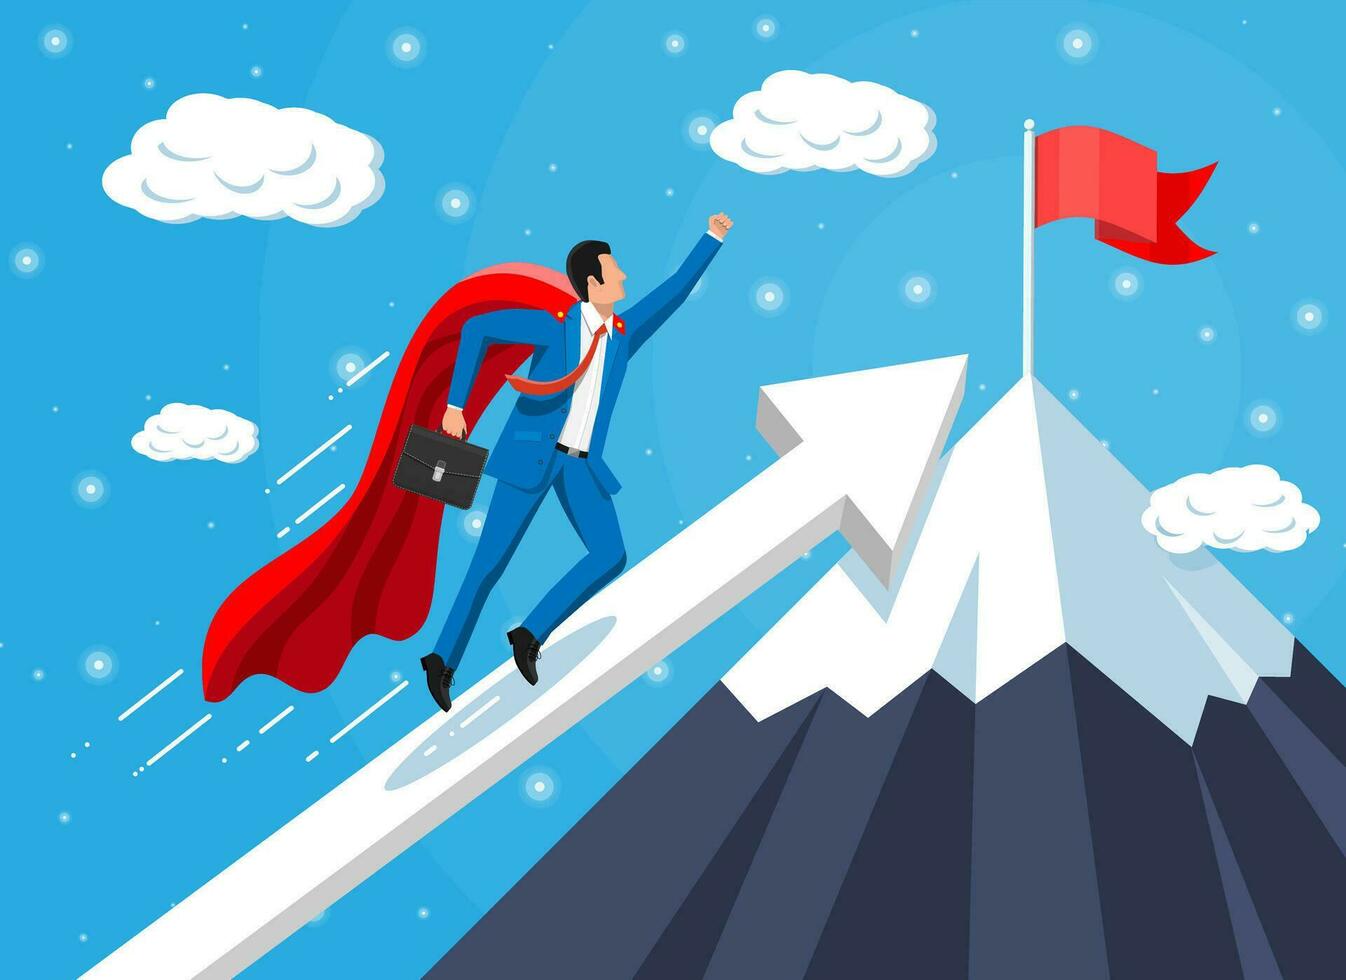 Super businessman on mountain chart ladder with waving necktie and briefcase. Goal setting. Smart goal. Business target concept. Achievement and success. Vector illustration in flat style